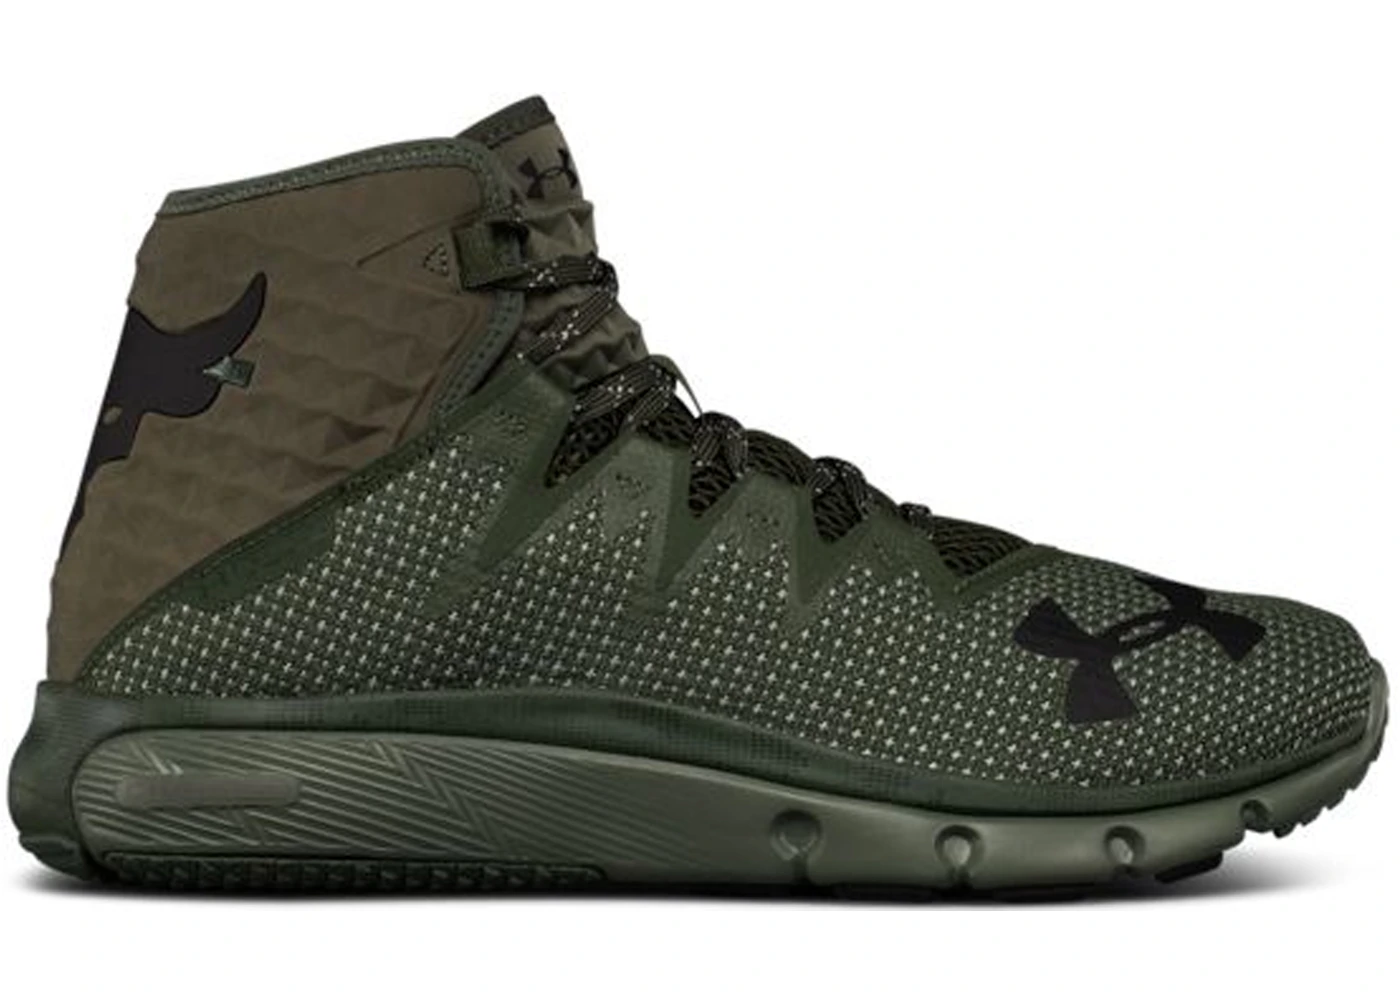 Under Armour The Rock Delta Downtown Green Men's - 3020175